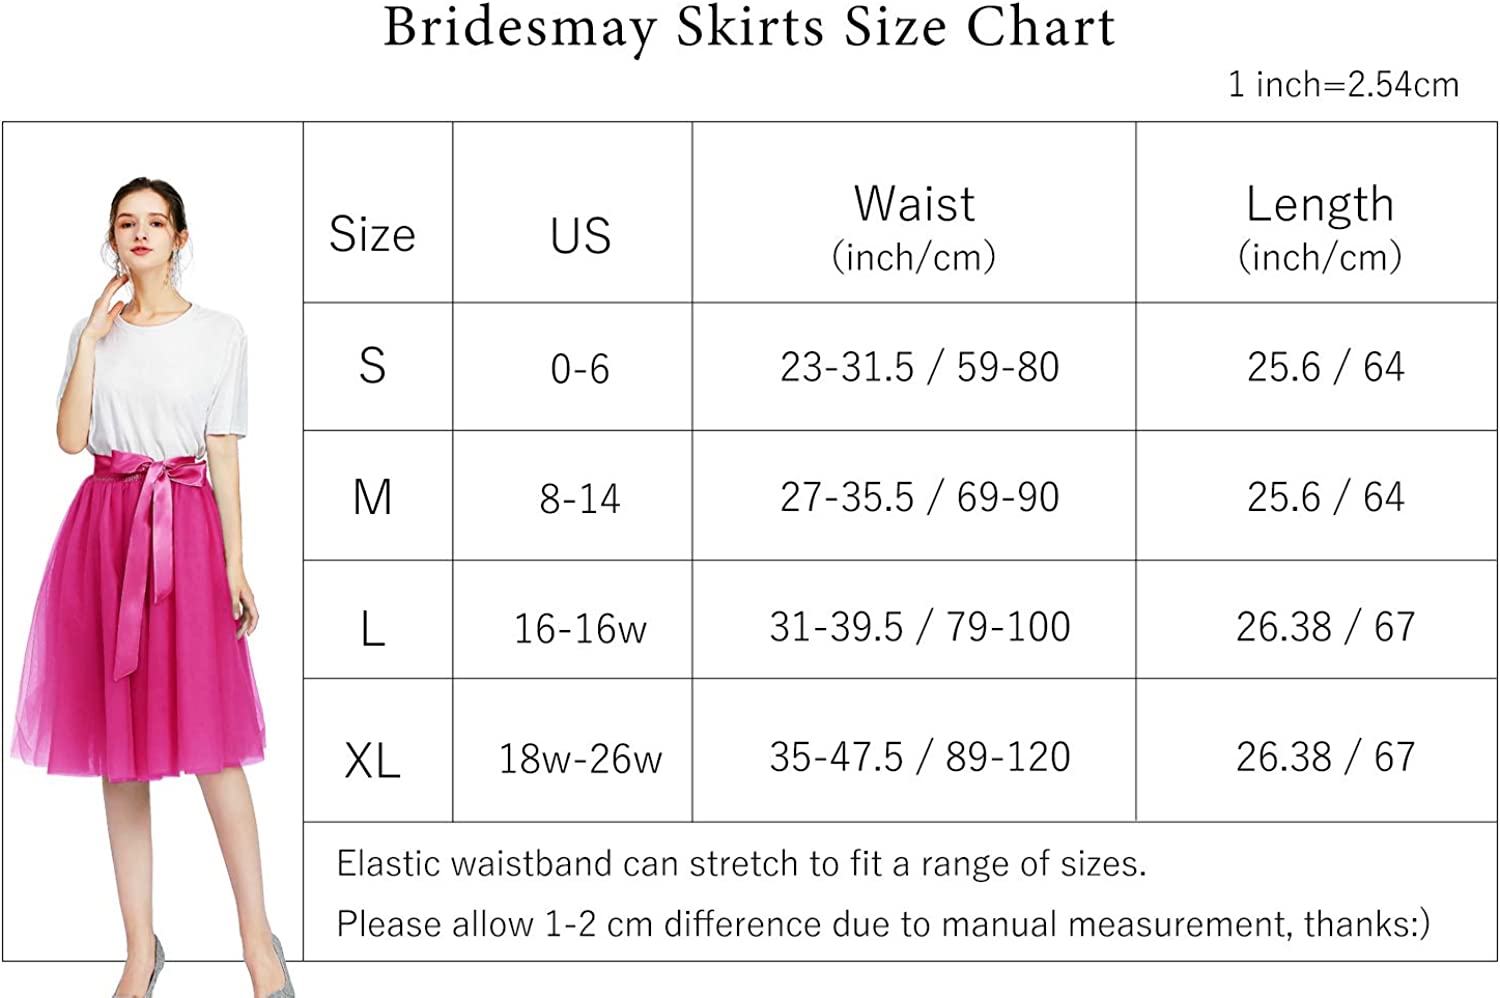 Bridesmay Women's Tulle Skirt Knee Length 6-Layered Wedding Party Homecoming Prom Dress